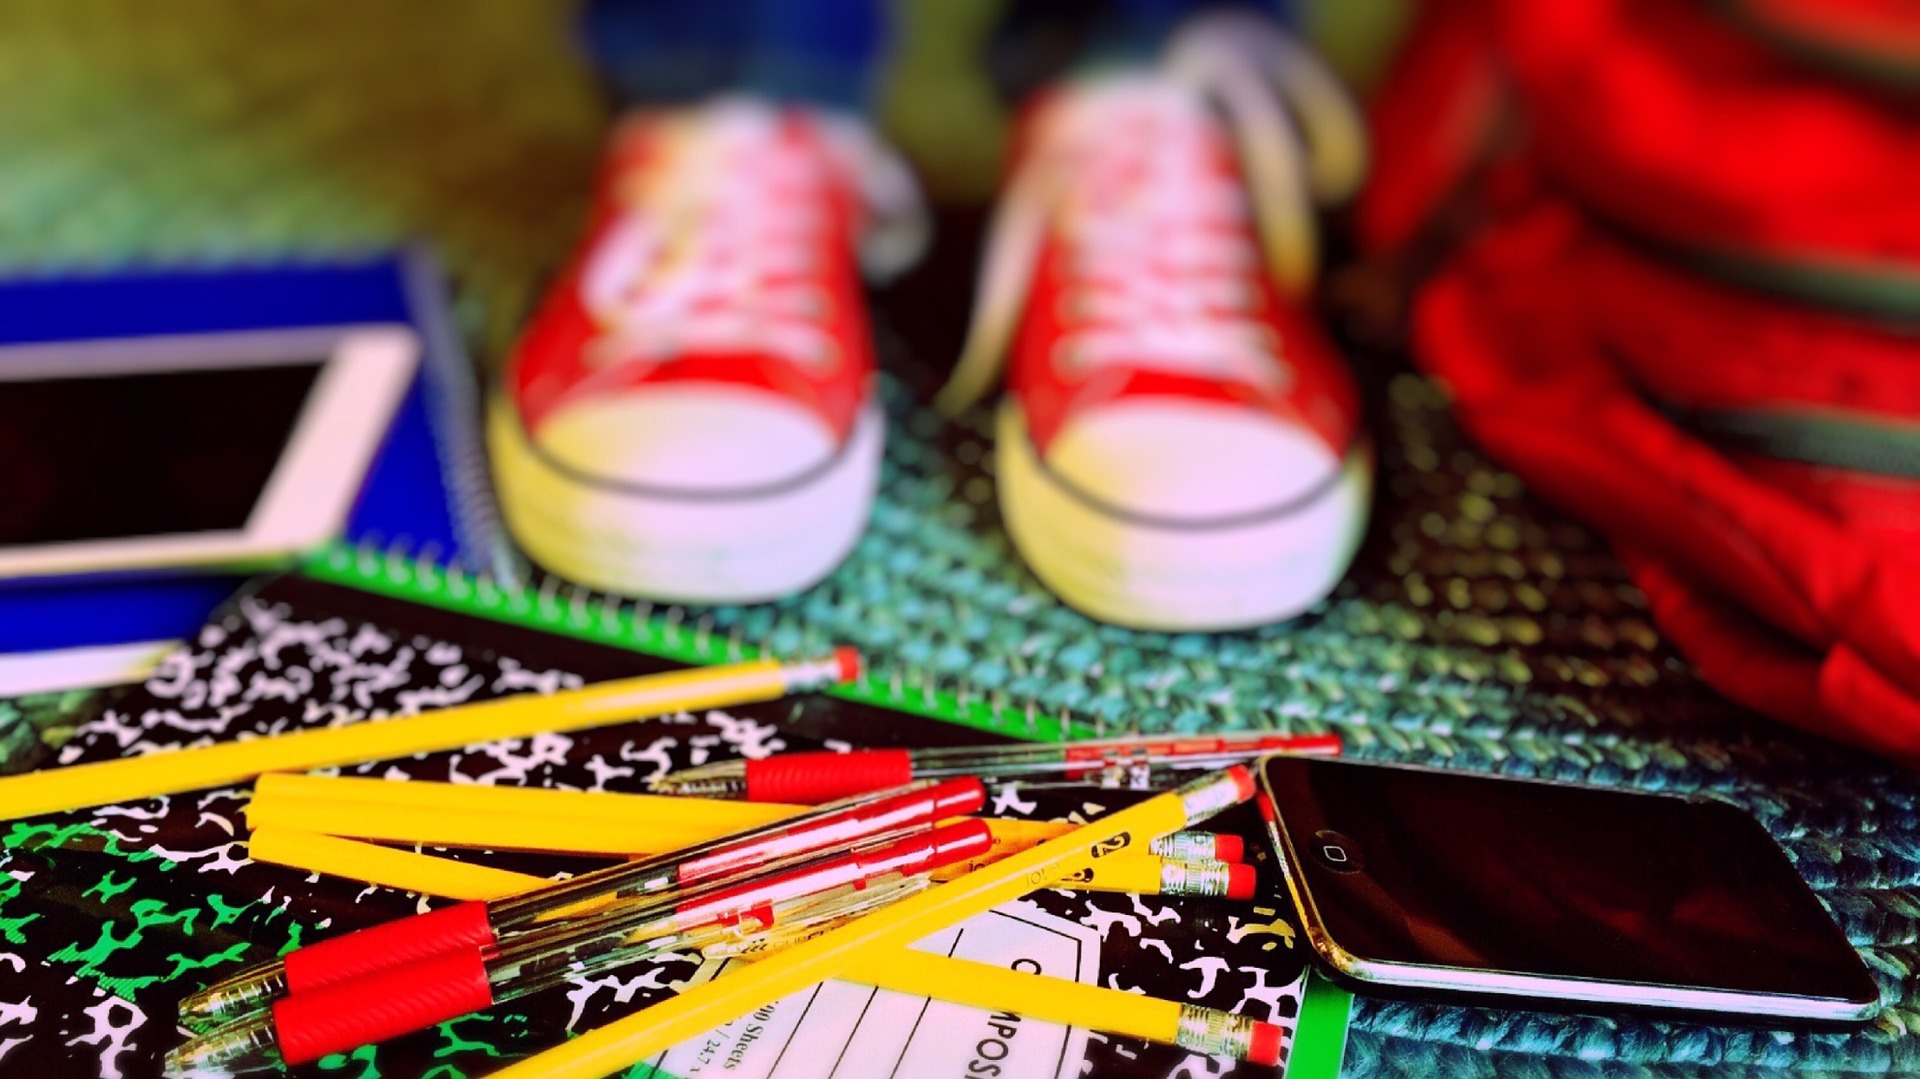 Back to School Already?! Giveaway Items Every Teacher, Kid, and Parent Will Want